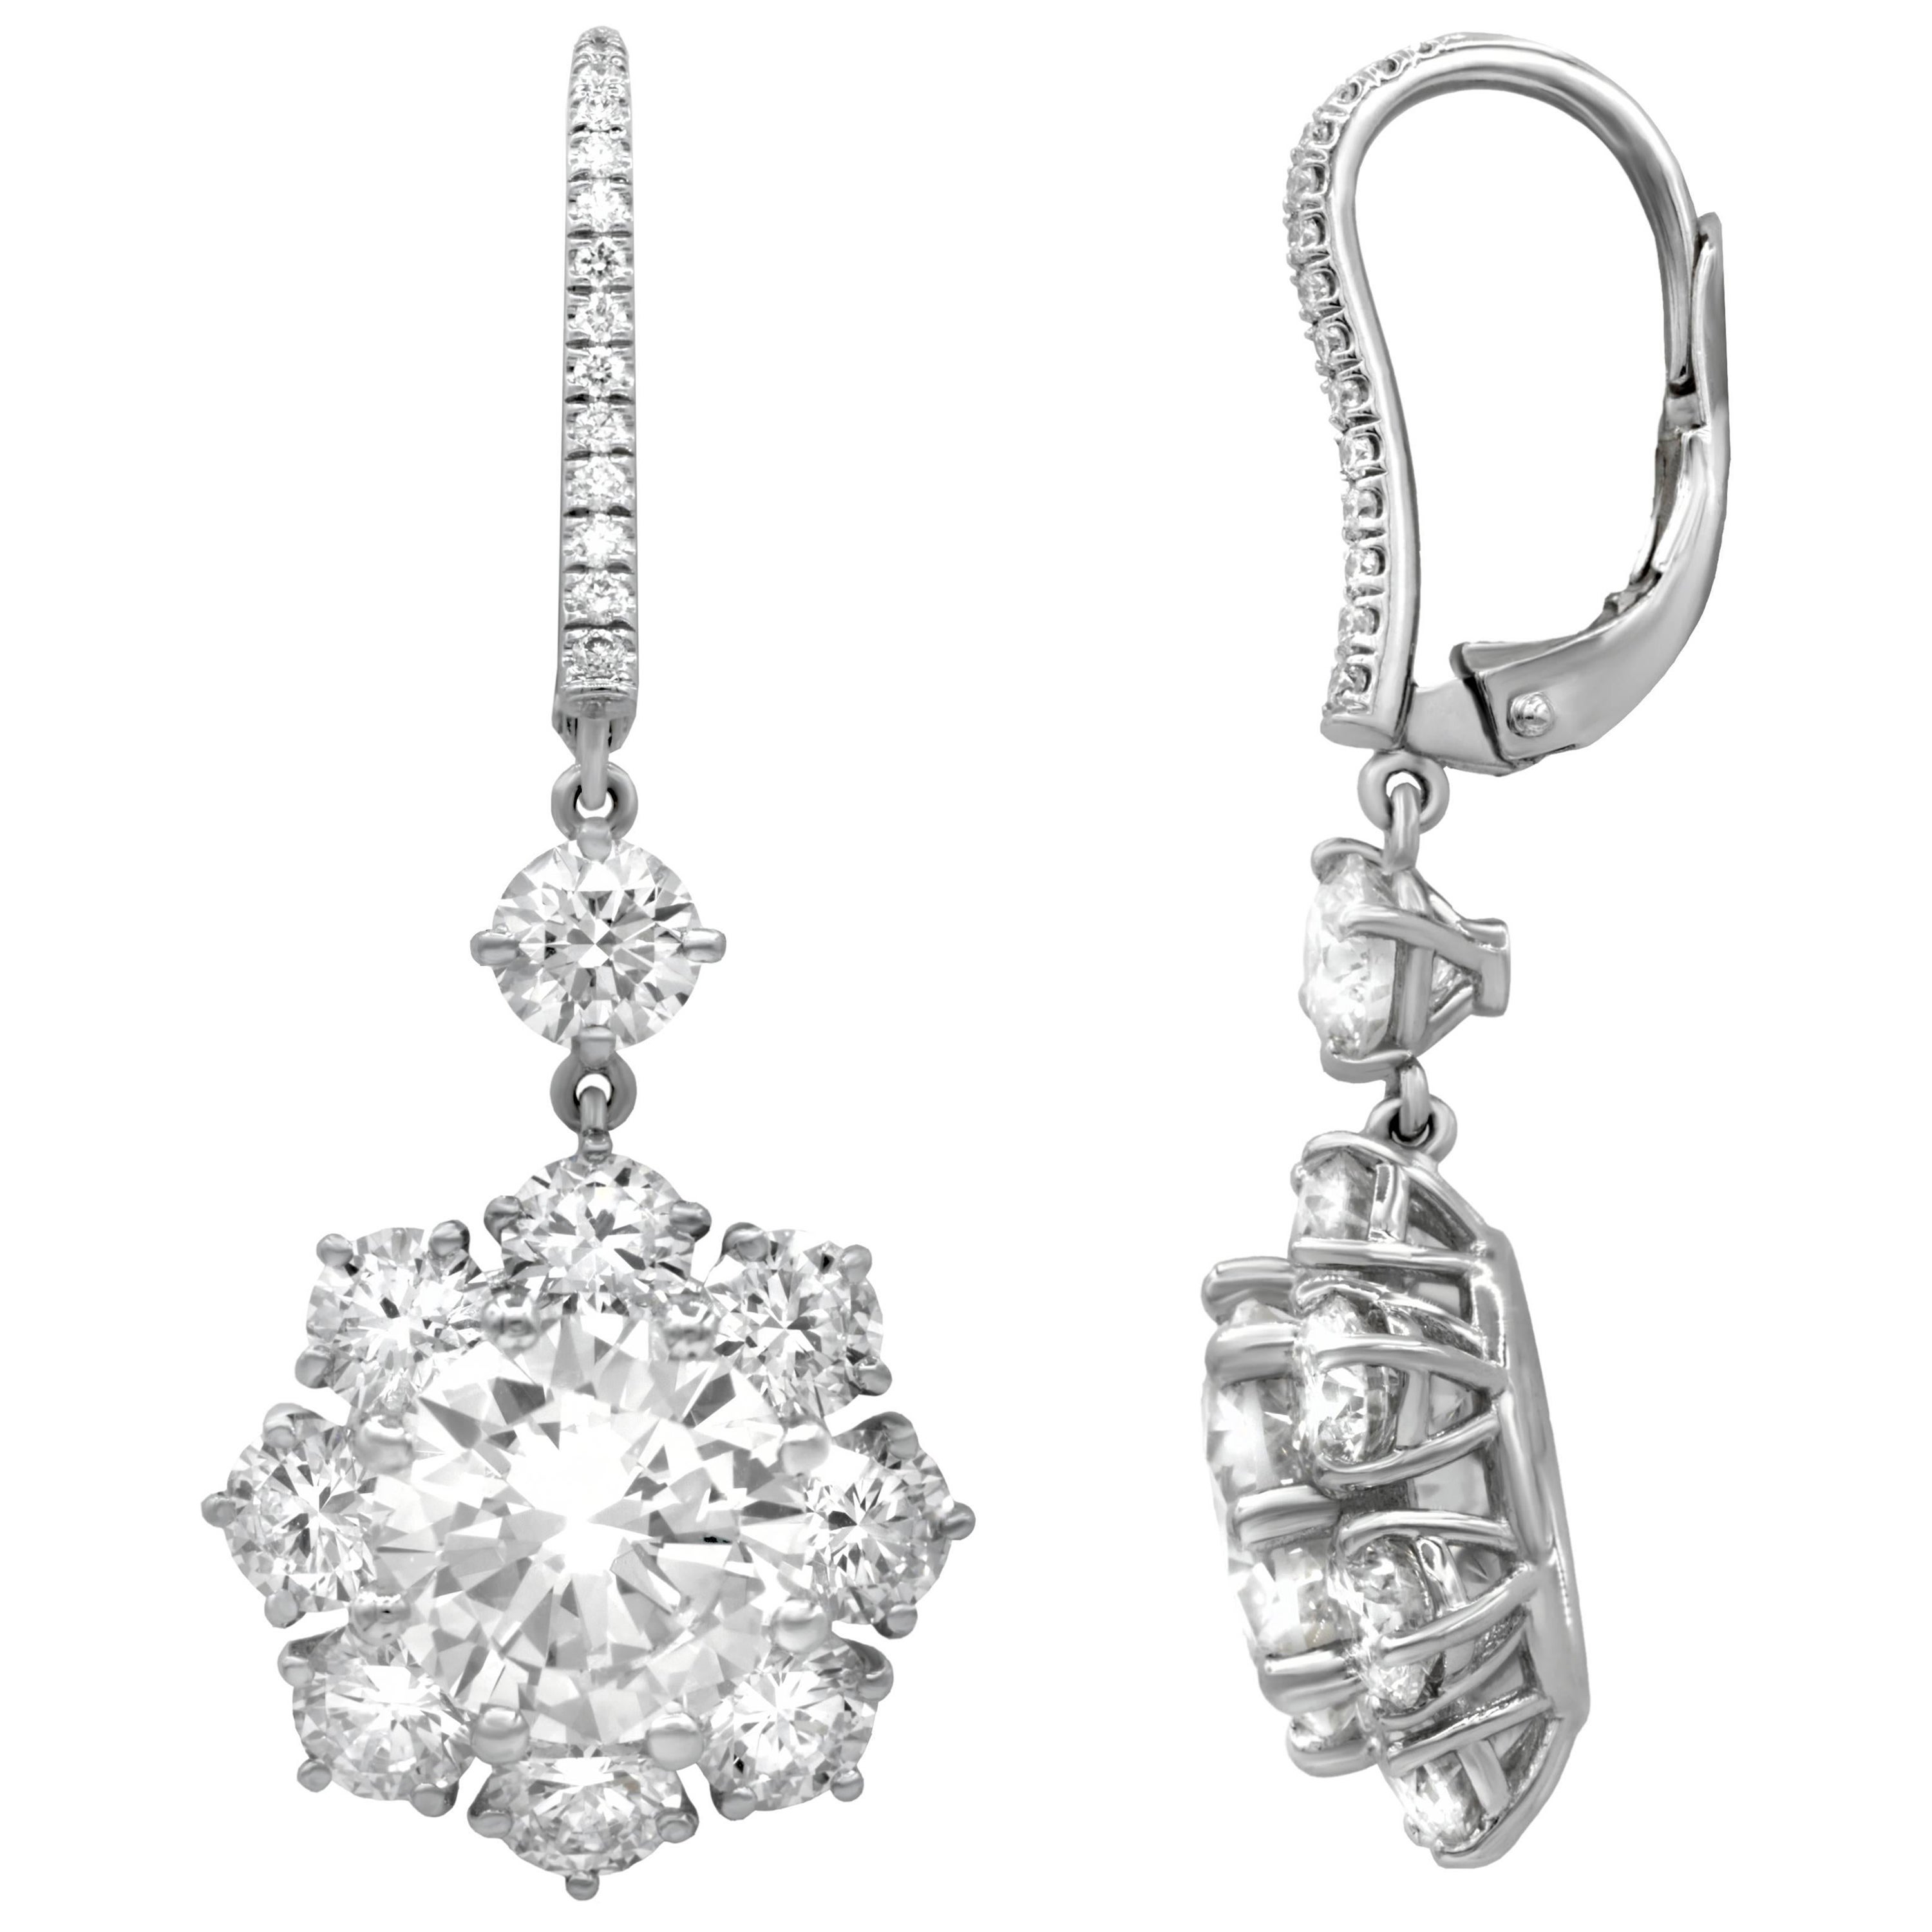 Magnificent 12.17 Carat Round Diamond Earrings For Sale